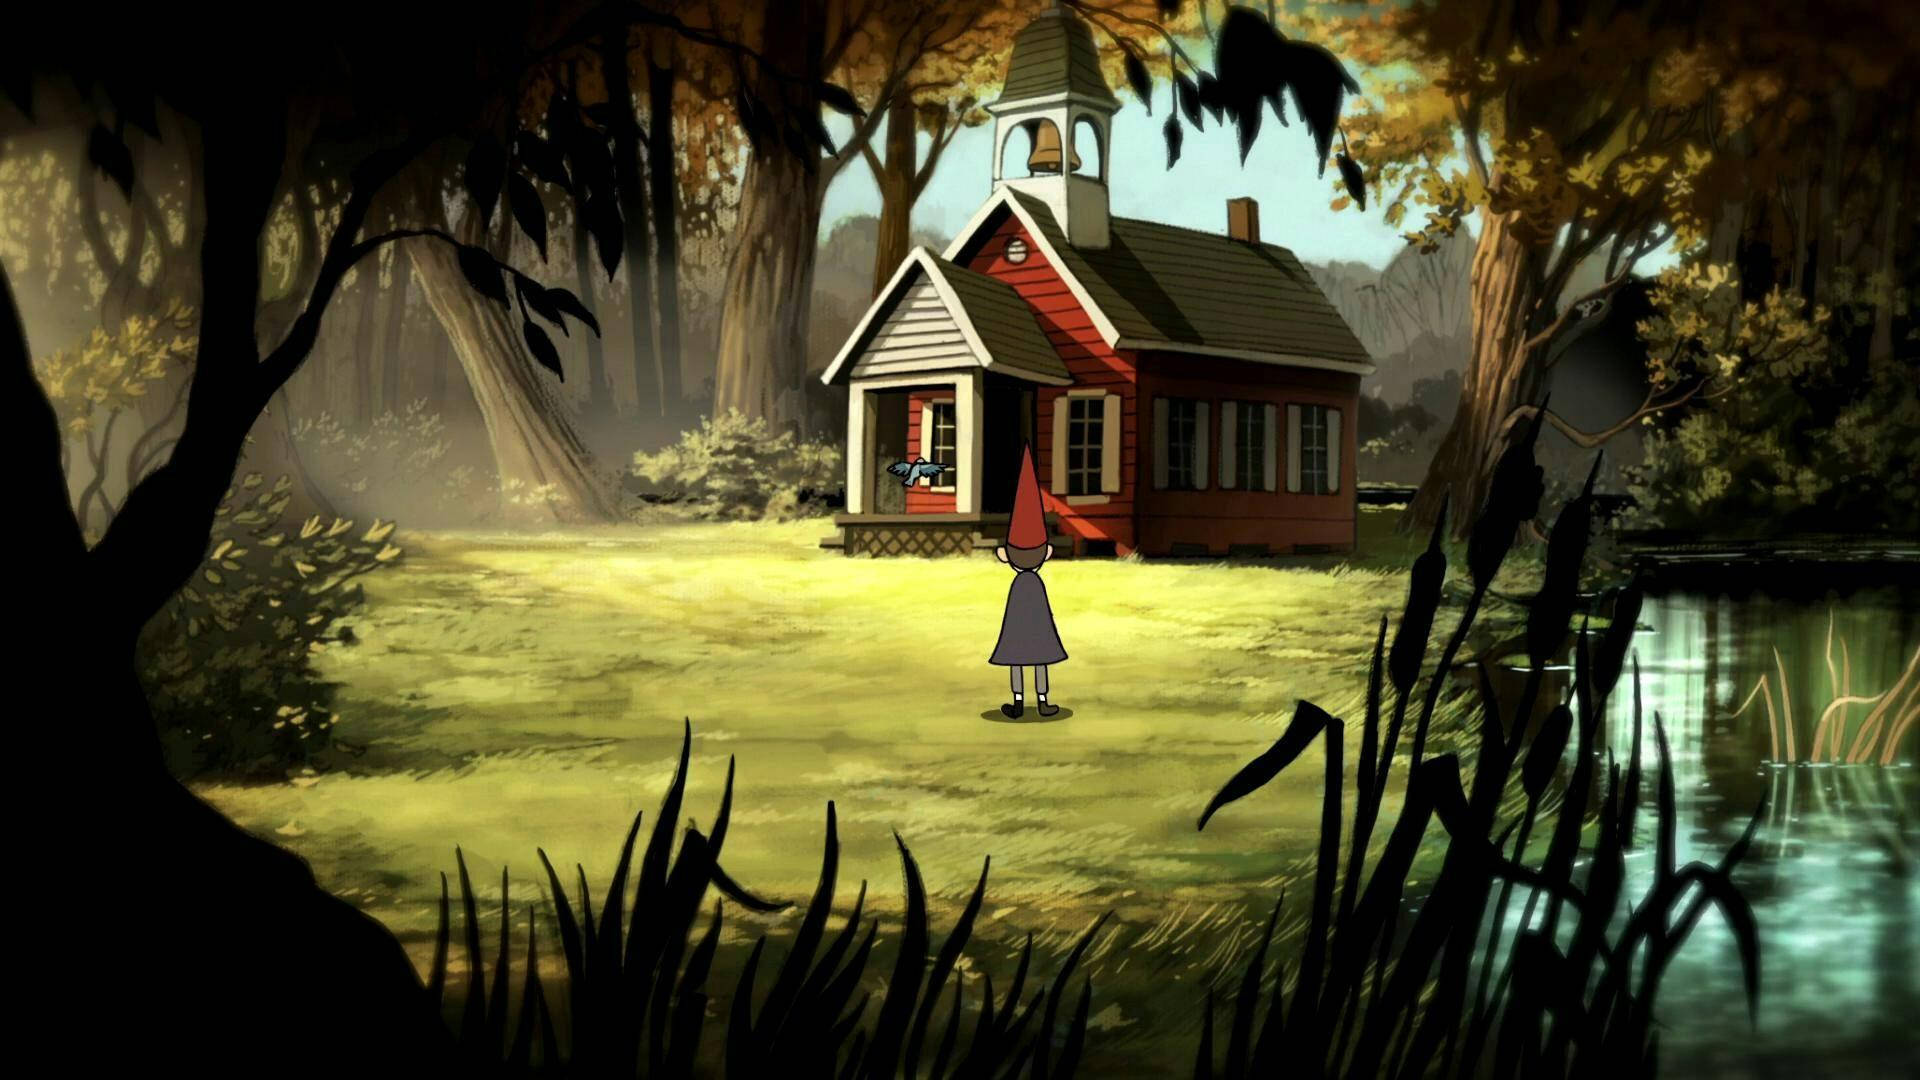 Wirt Looking At House Over The Garden Wall Wallpaper